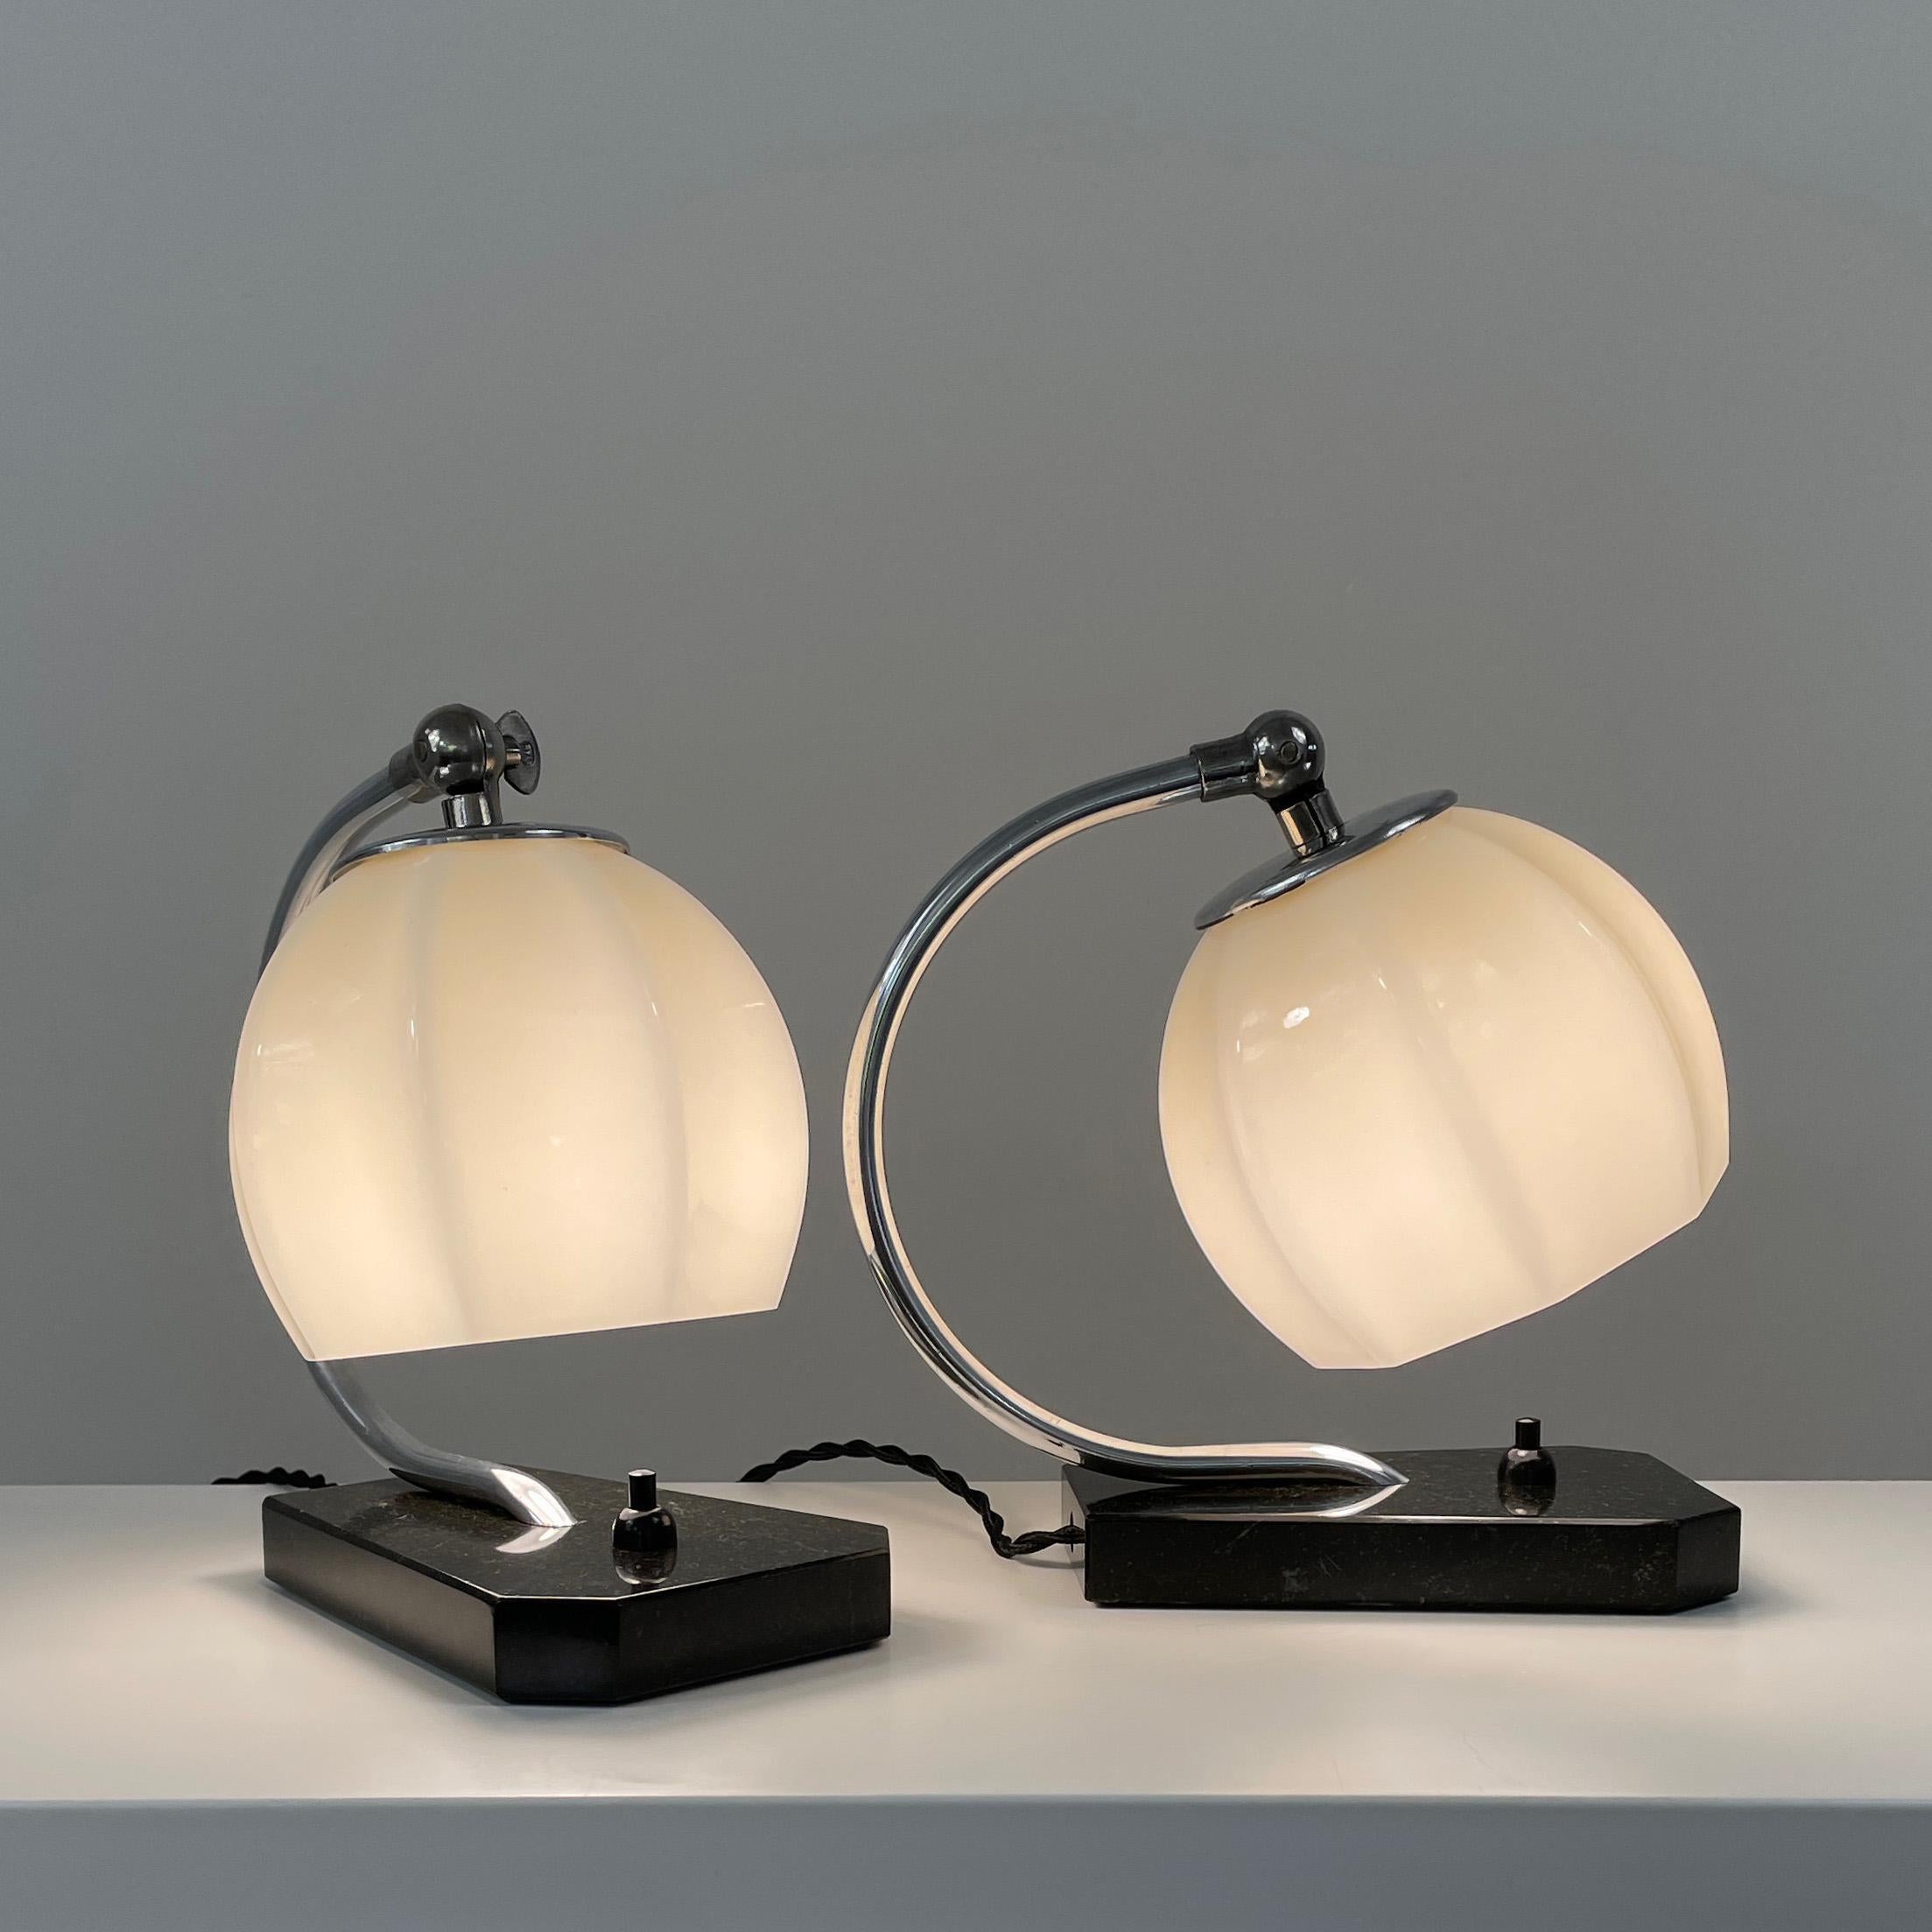 German Art Deco Opaline Glass, Marble and Aluminum Table Lamps, 1930s For Sale 2